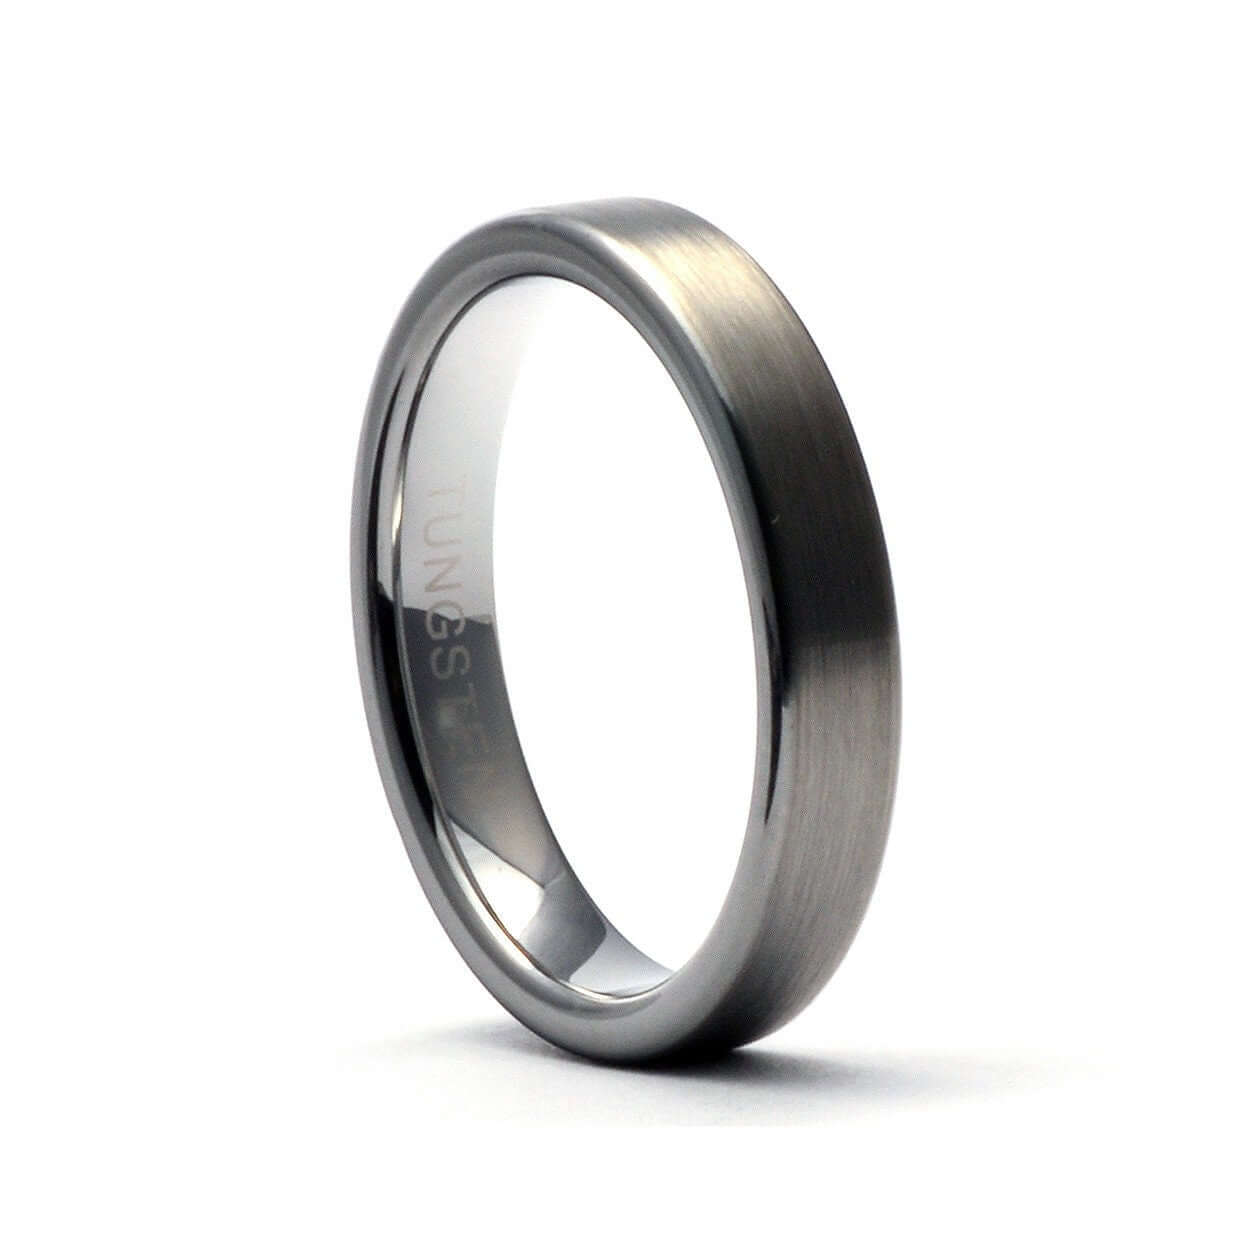 Male Wedding Band, Tungsten Carbide Ring, Tungsten Wedding Ring Matte , Mens Minimalist Ring, Tungsten, 8mm, 6mm, 4mm Ring, Parie Jewelry